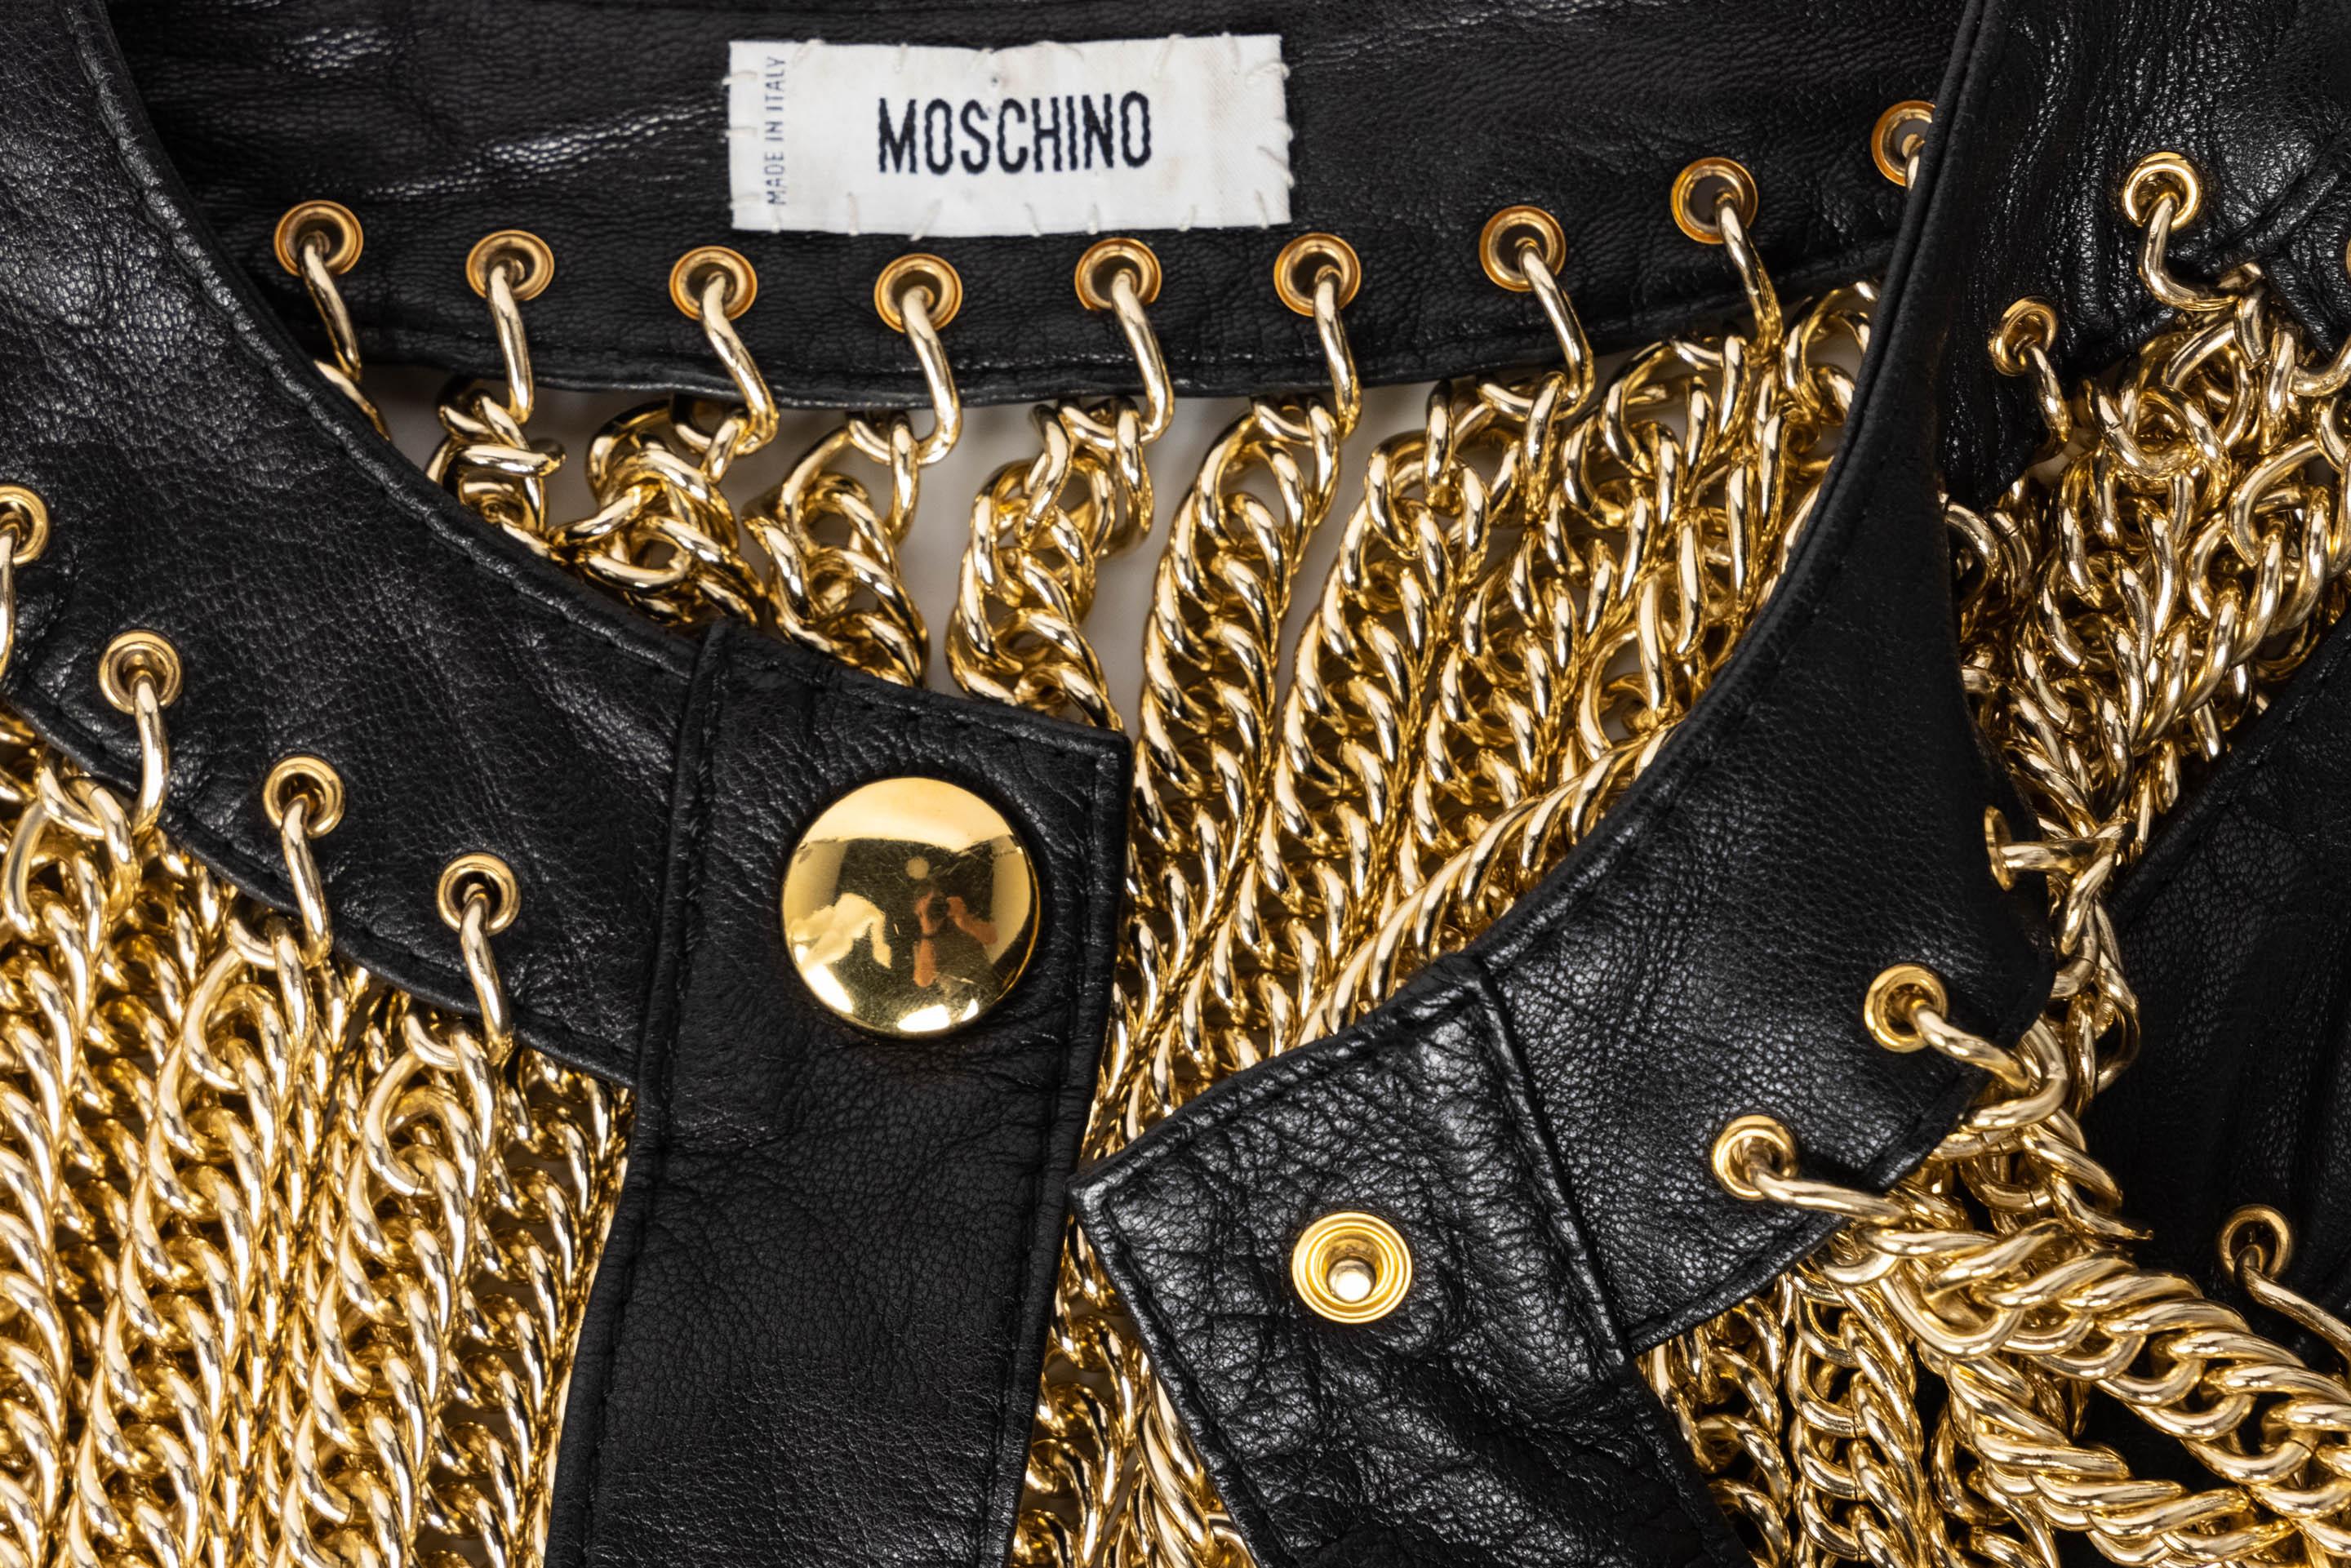 Moschino Archive Gold Chain Leather Jacket JLO Spring 2010 For Sale 1